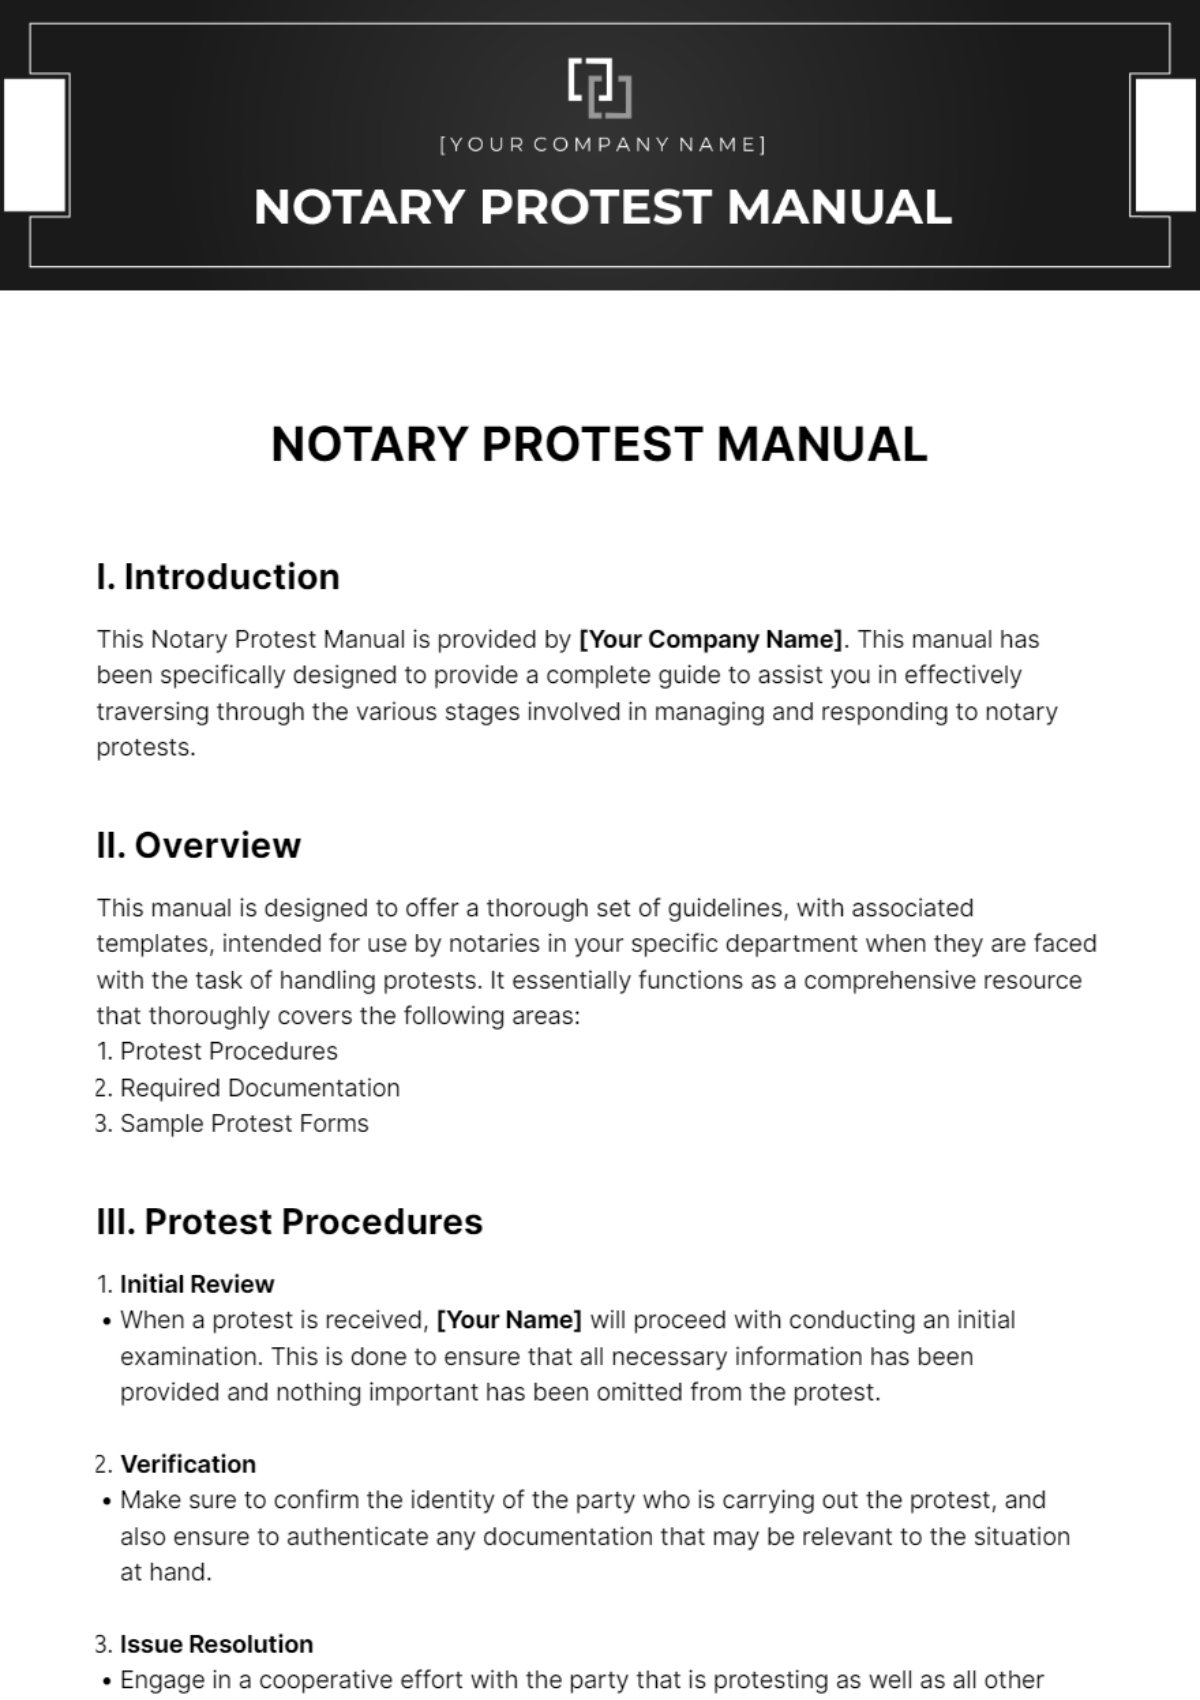 Free Notary Protest Manual Template